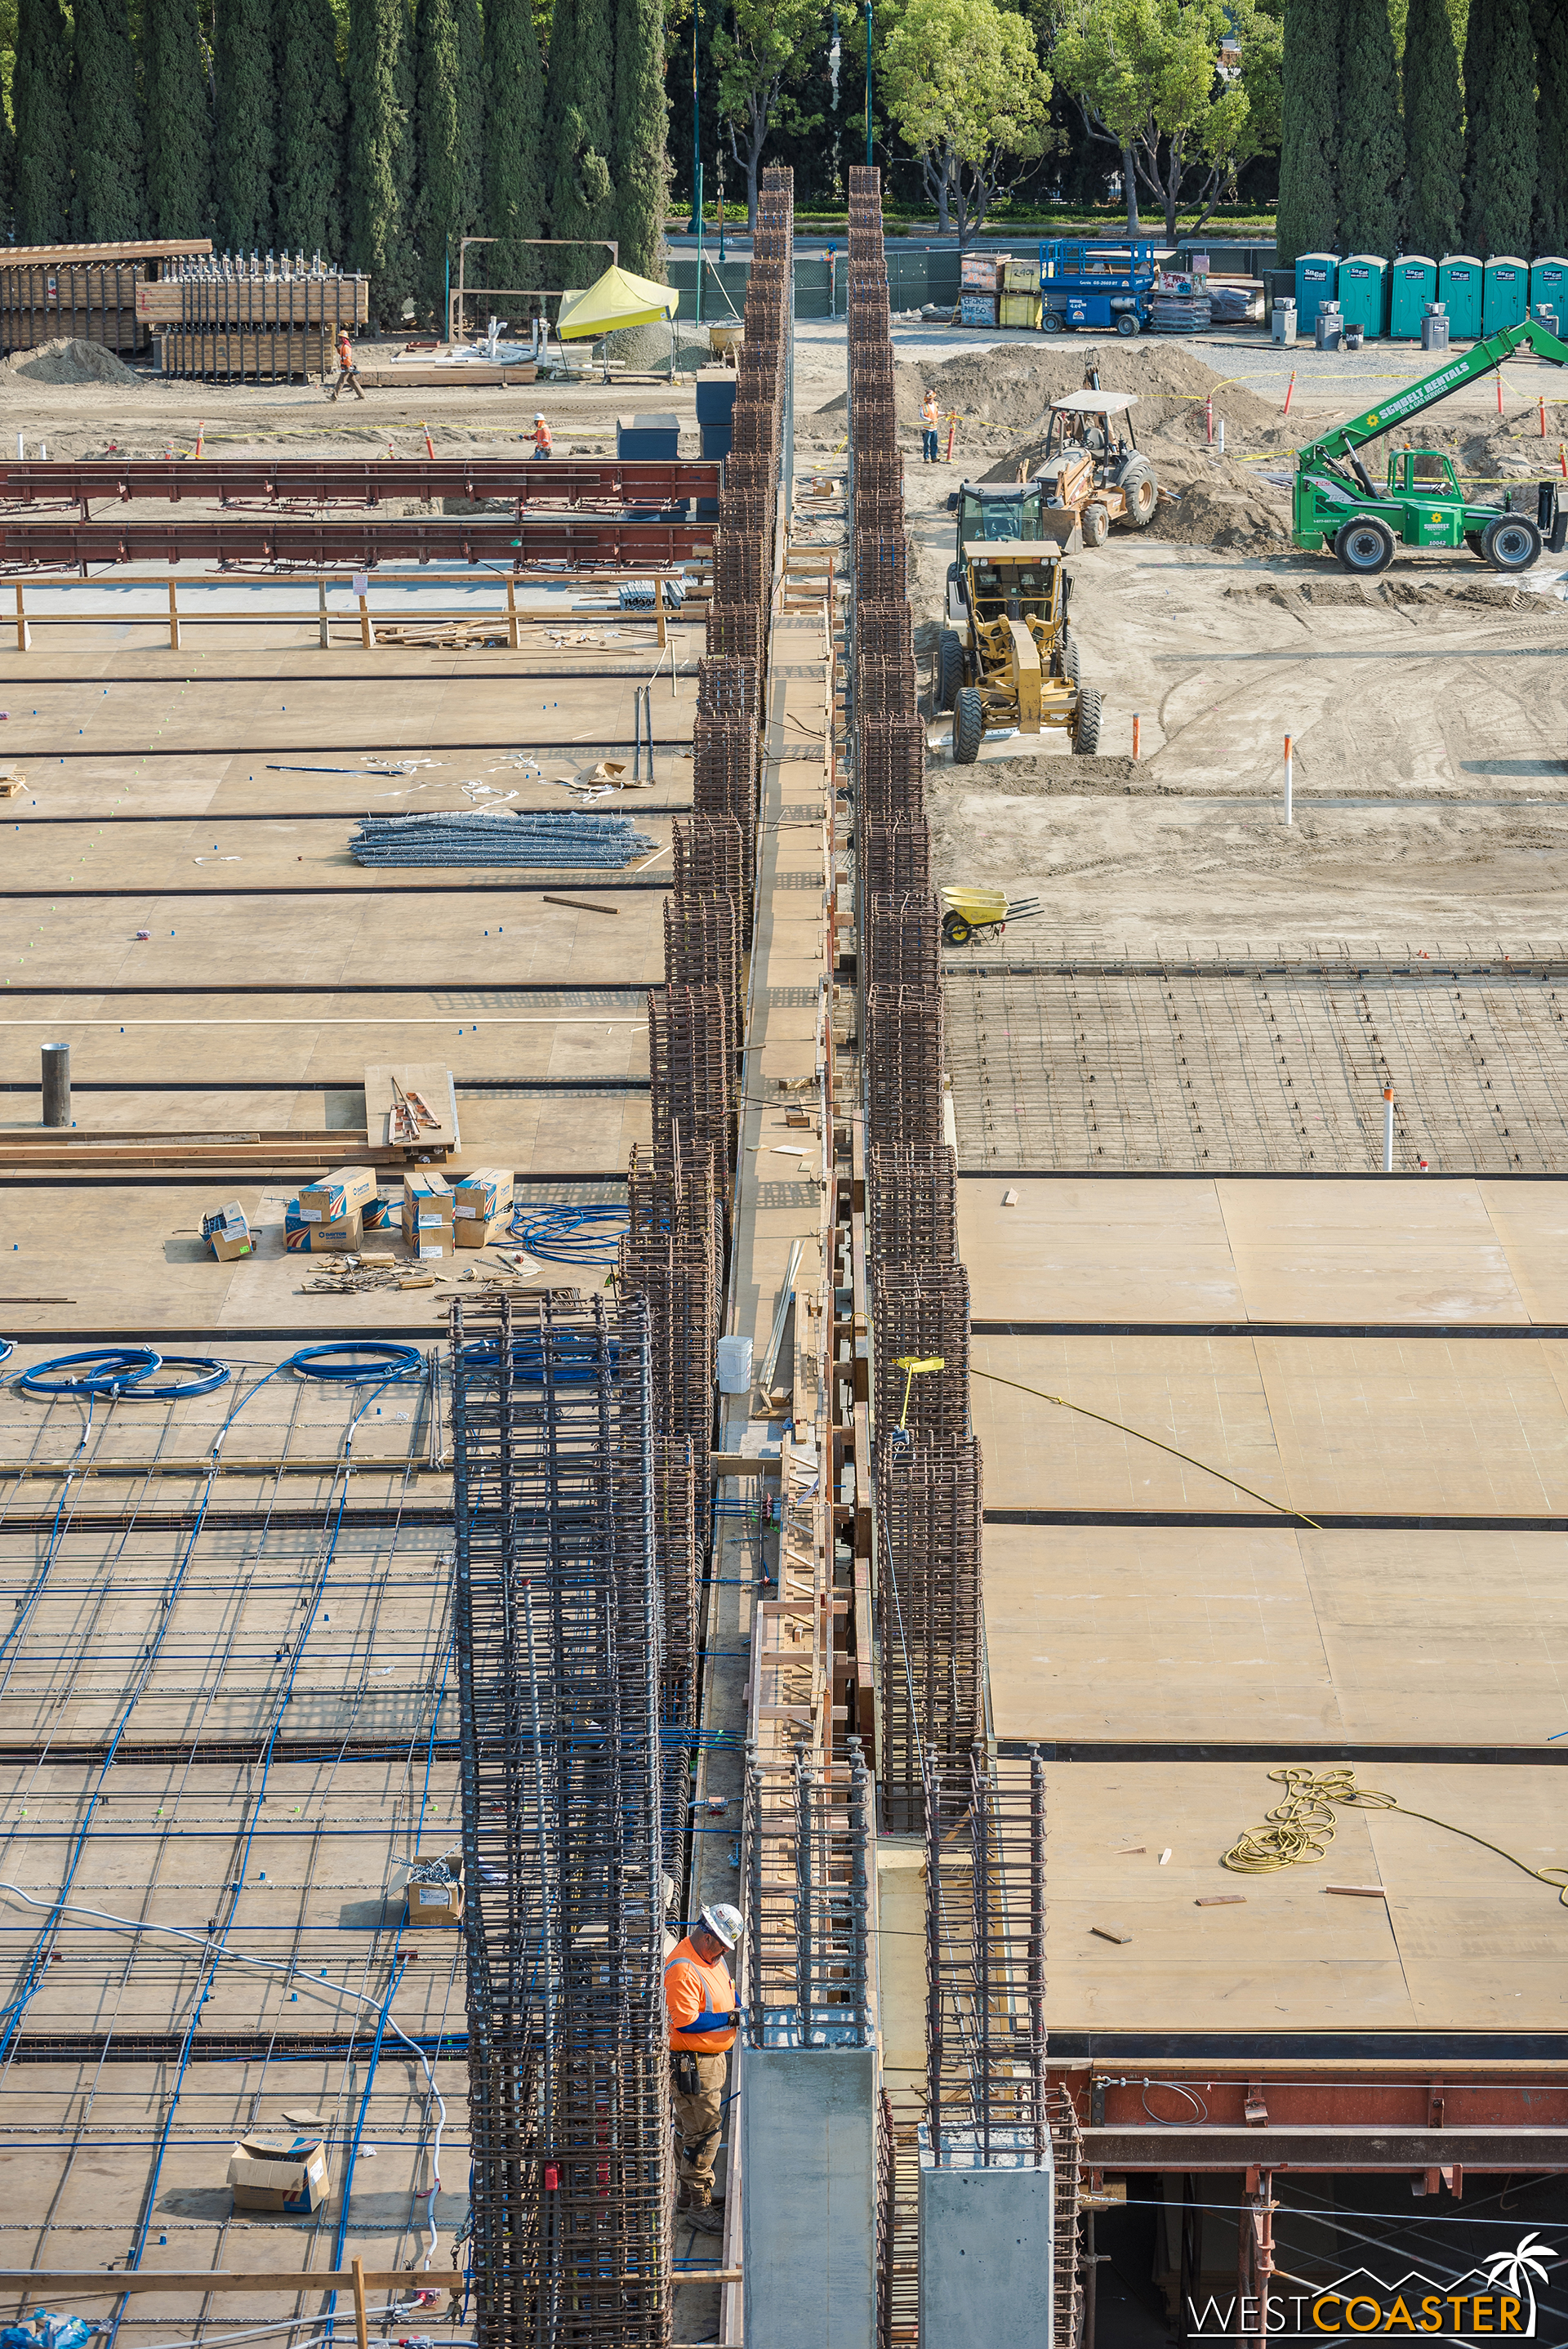  Down the line of the seismic separation again, with more rebar.  Rebar gives concrete reinforcement and helps it behave strongly in tension; the concrete itself is very strong in compression.  Together, they form a durable and flexible structural fr